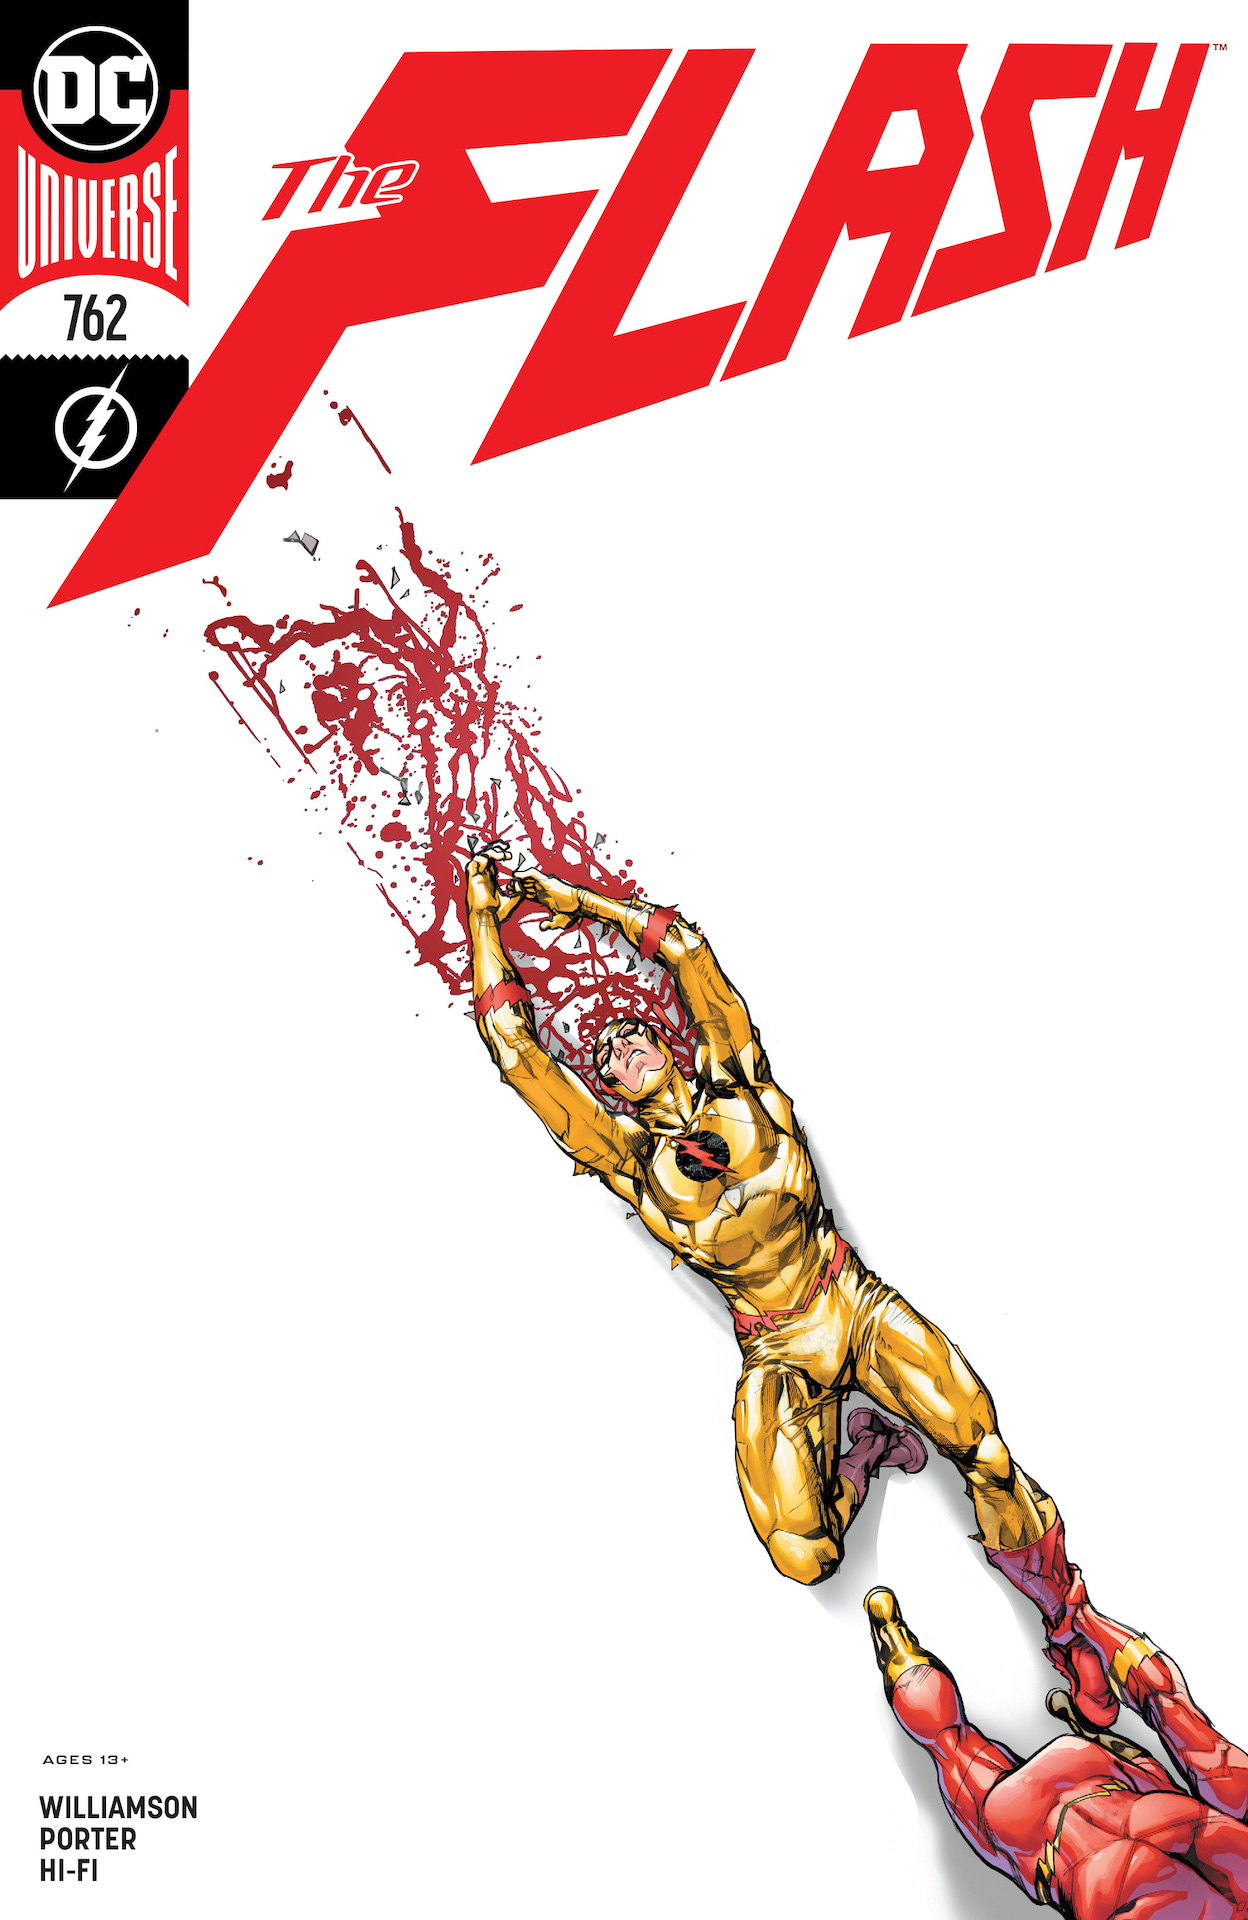 DC Preview: The Flash #762